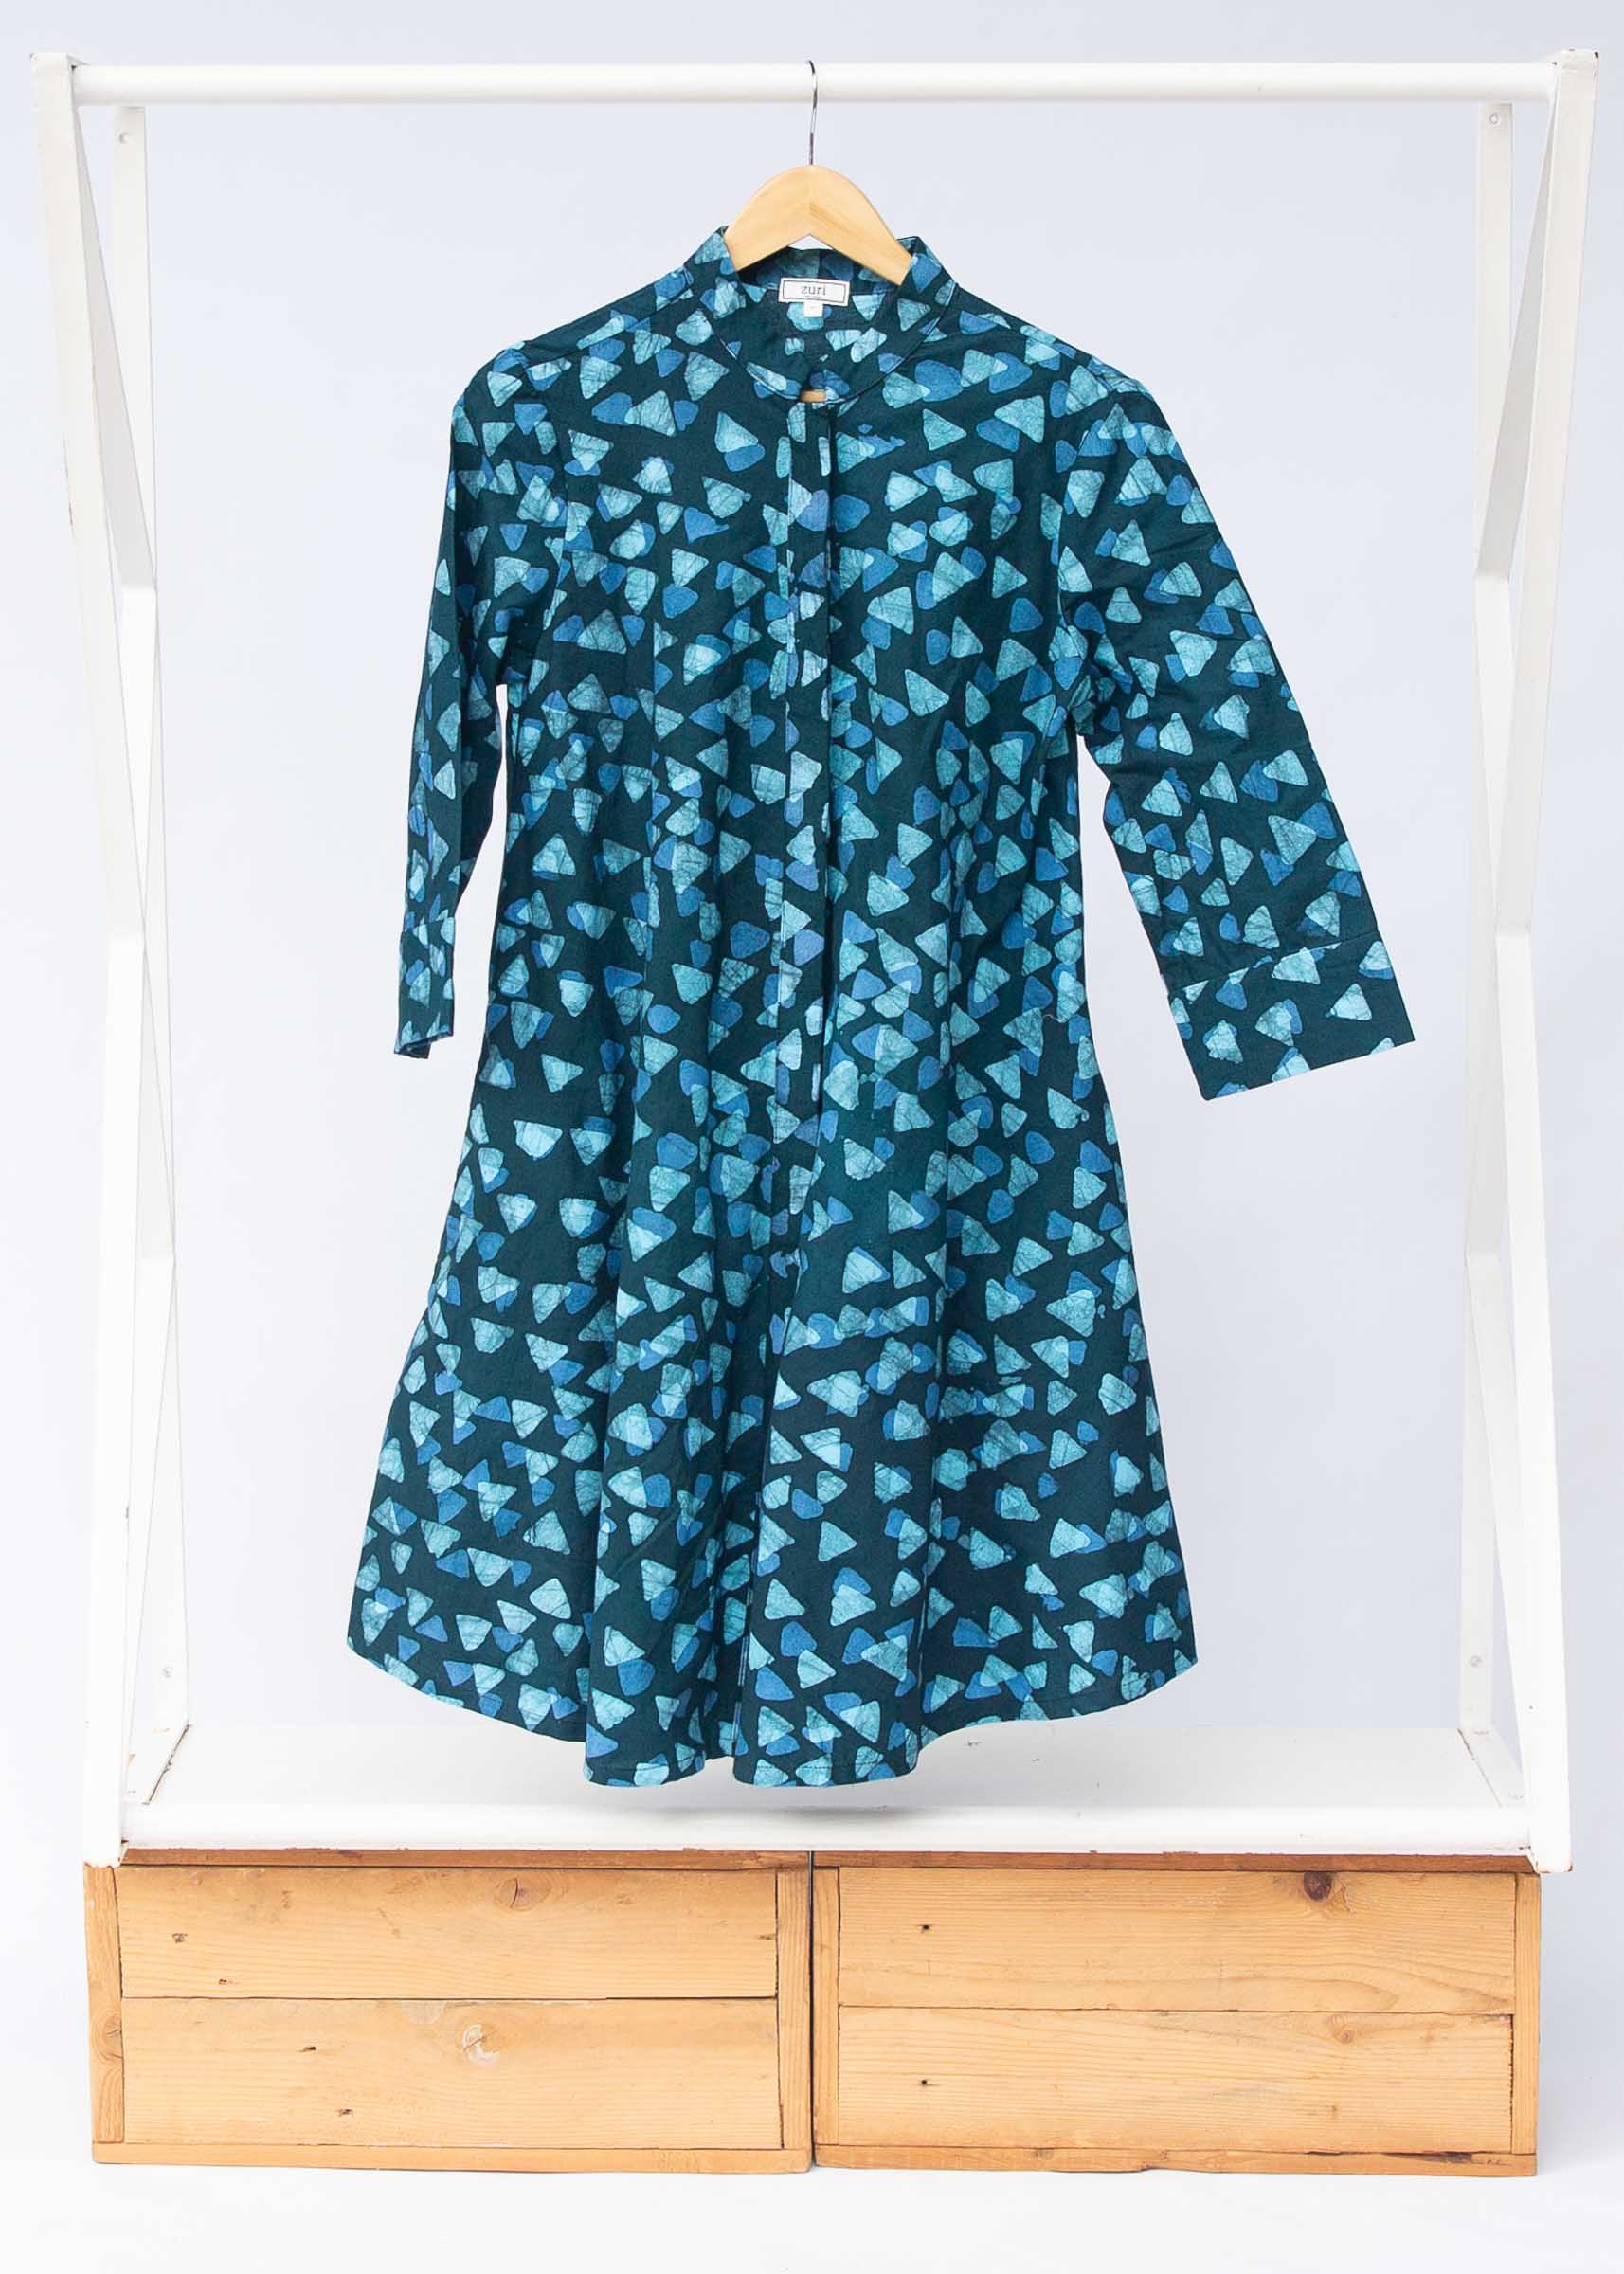 Display of batik dress with hues of blue and teal. 